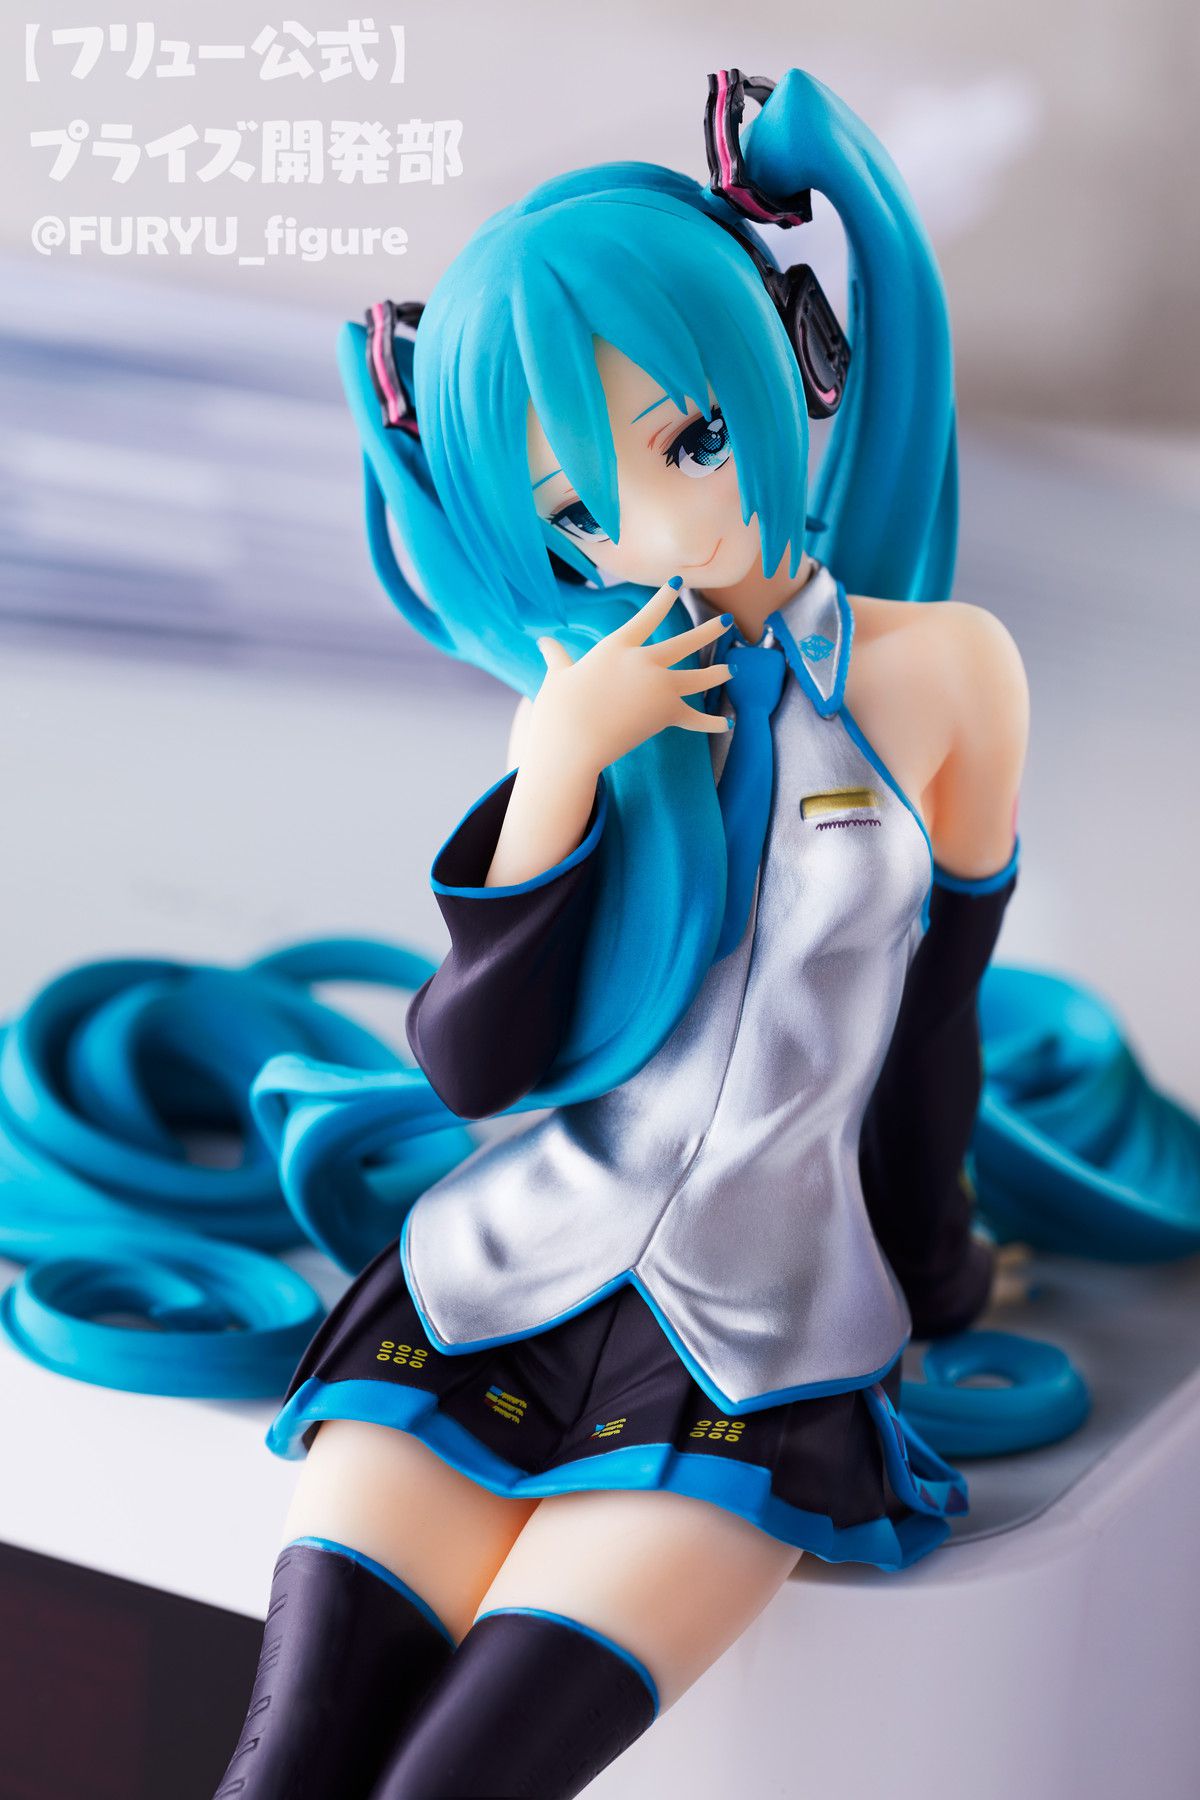 [Hatsune Miku] Nuyoru Stopper Figure, too much color and become a topic erotic 2